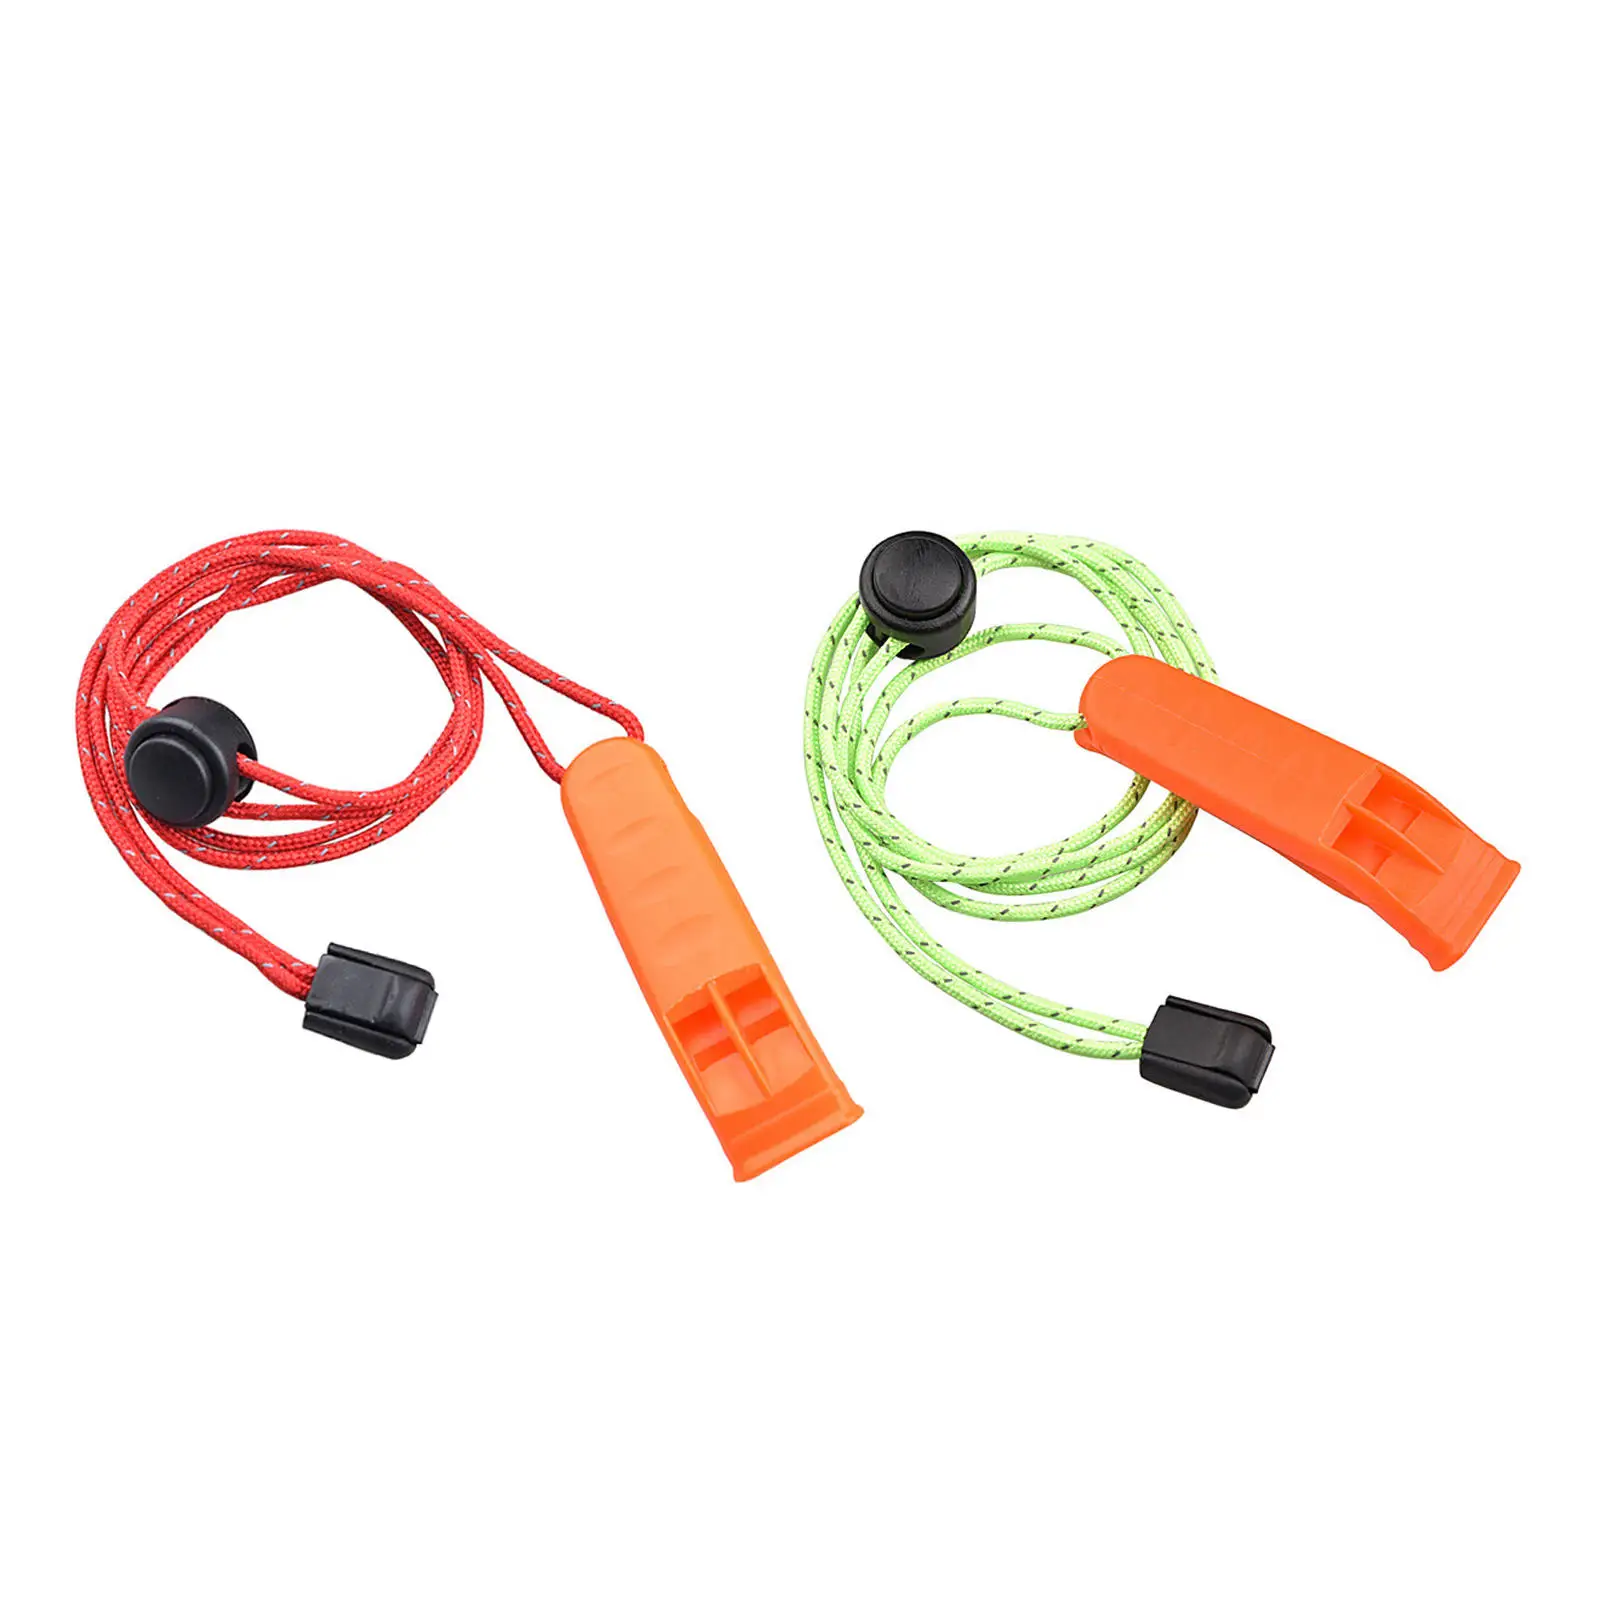 

Portable Emergency Whistles Outdoor Survival Safety Whistle Loud Sound for Kayak Hiking Fishing Lifeguard Kids Adults